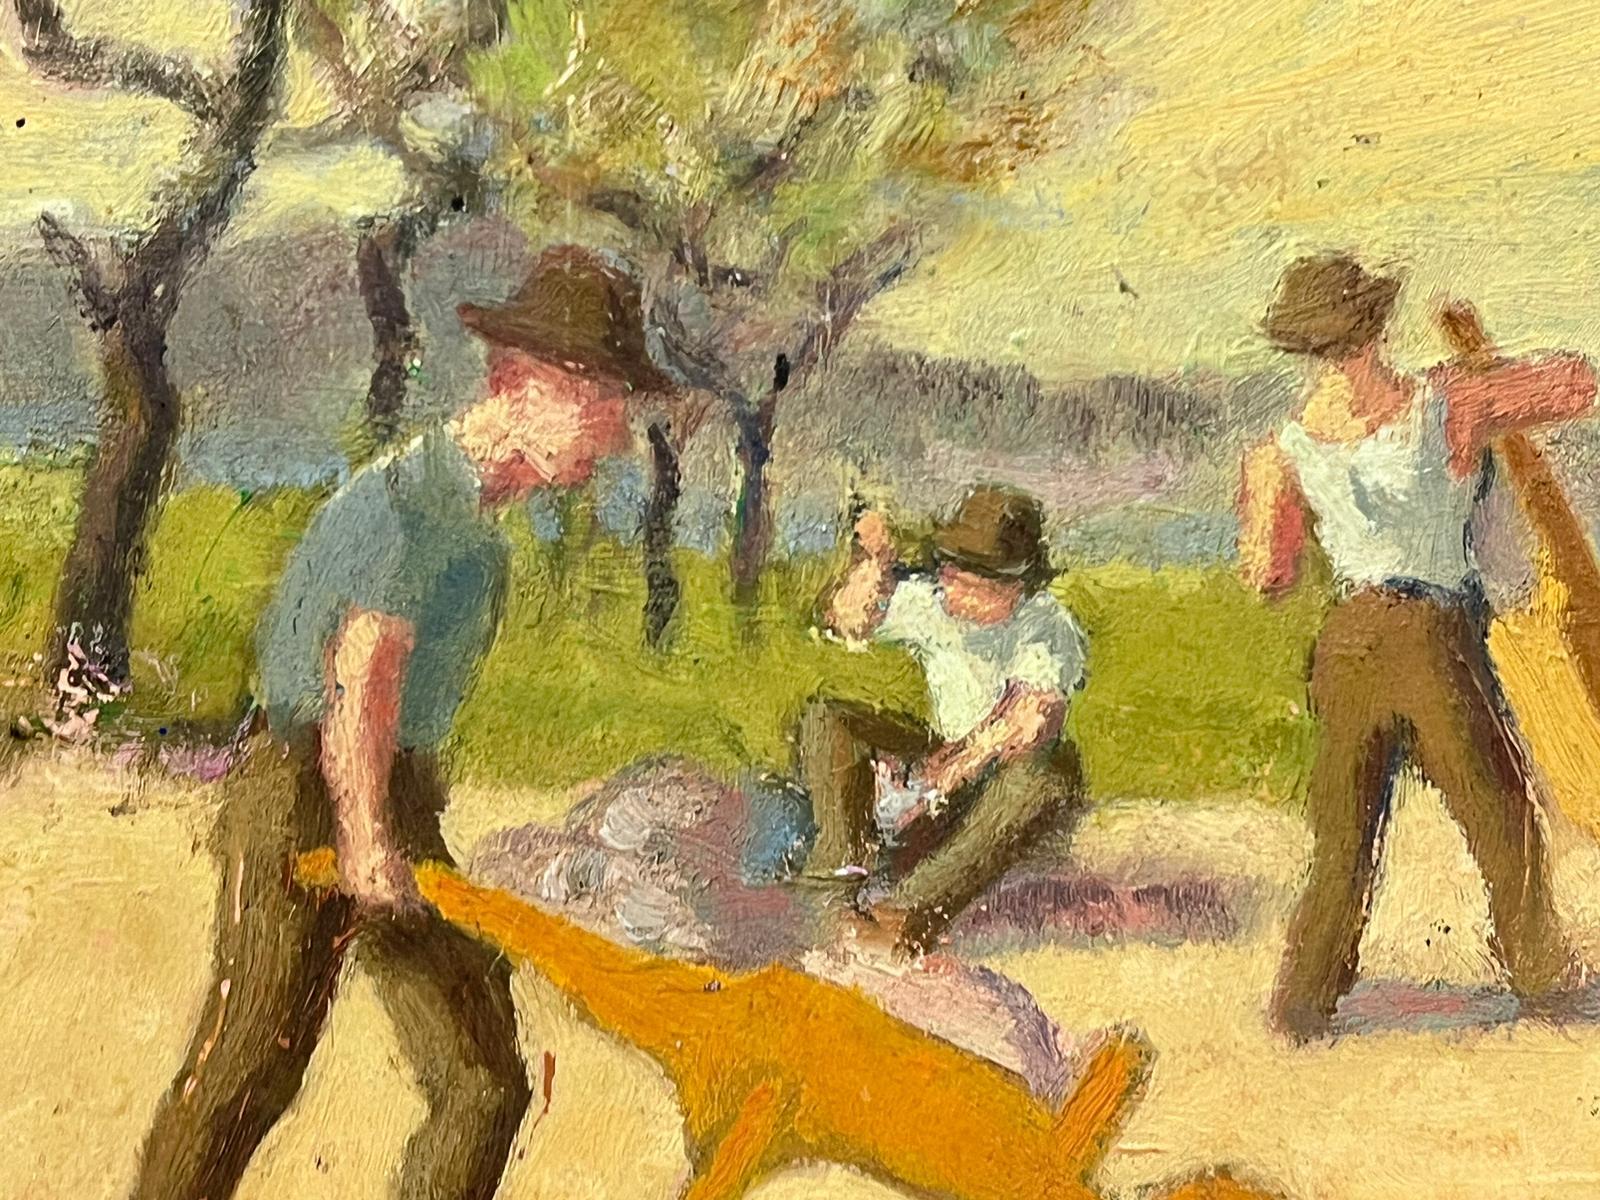 The Labourers
by Jacob Markiel (Polish 1911-2008)
oil on canvas , glued on board, unframed
board: 9 x 11 inches
provenance: private collection, Marseille
condition: a very few light surface scratches but overall good and sound condition

Jacob